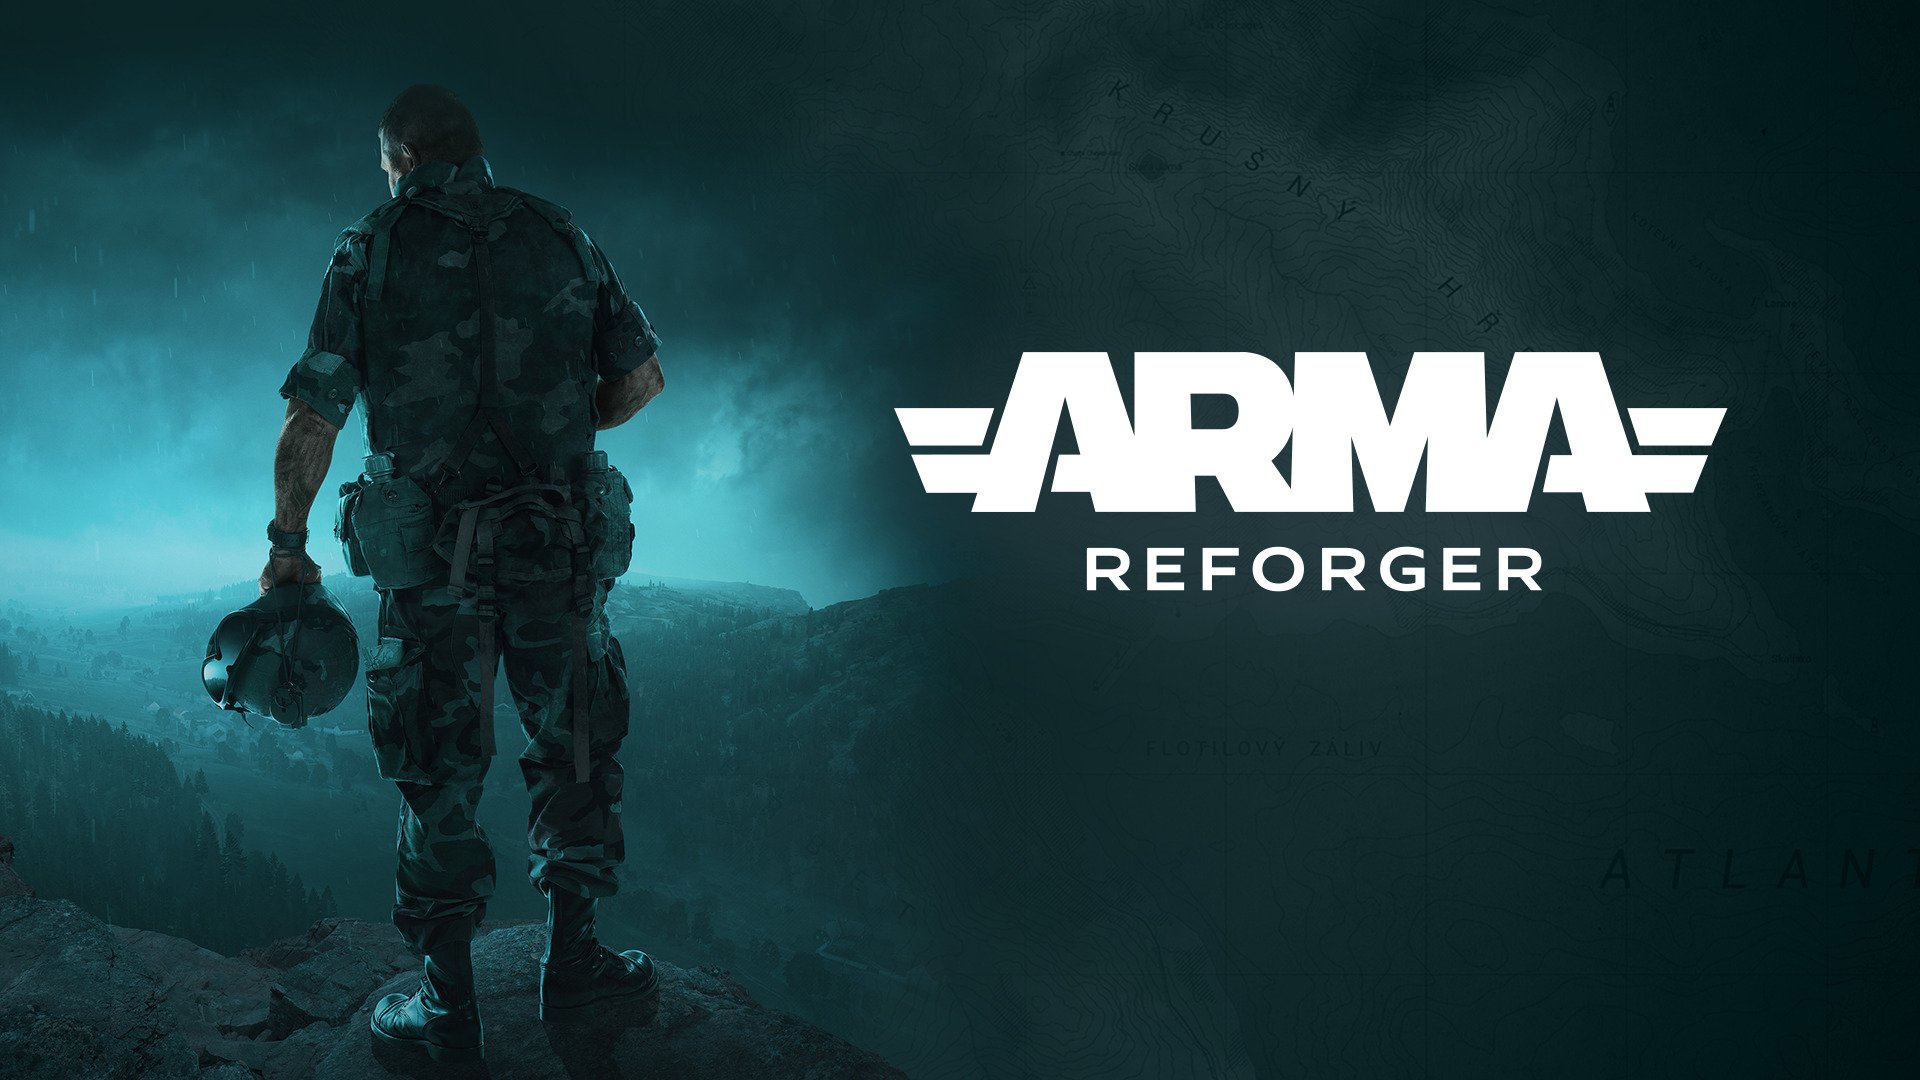 Arma 4 release date speculation and latest news 2023